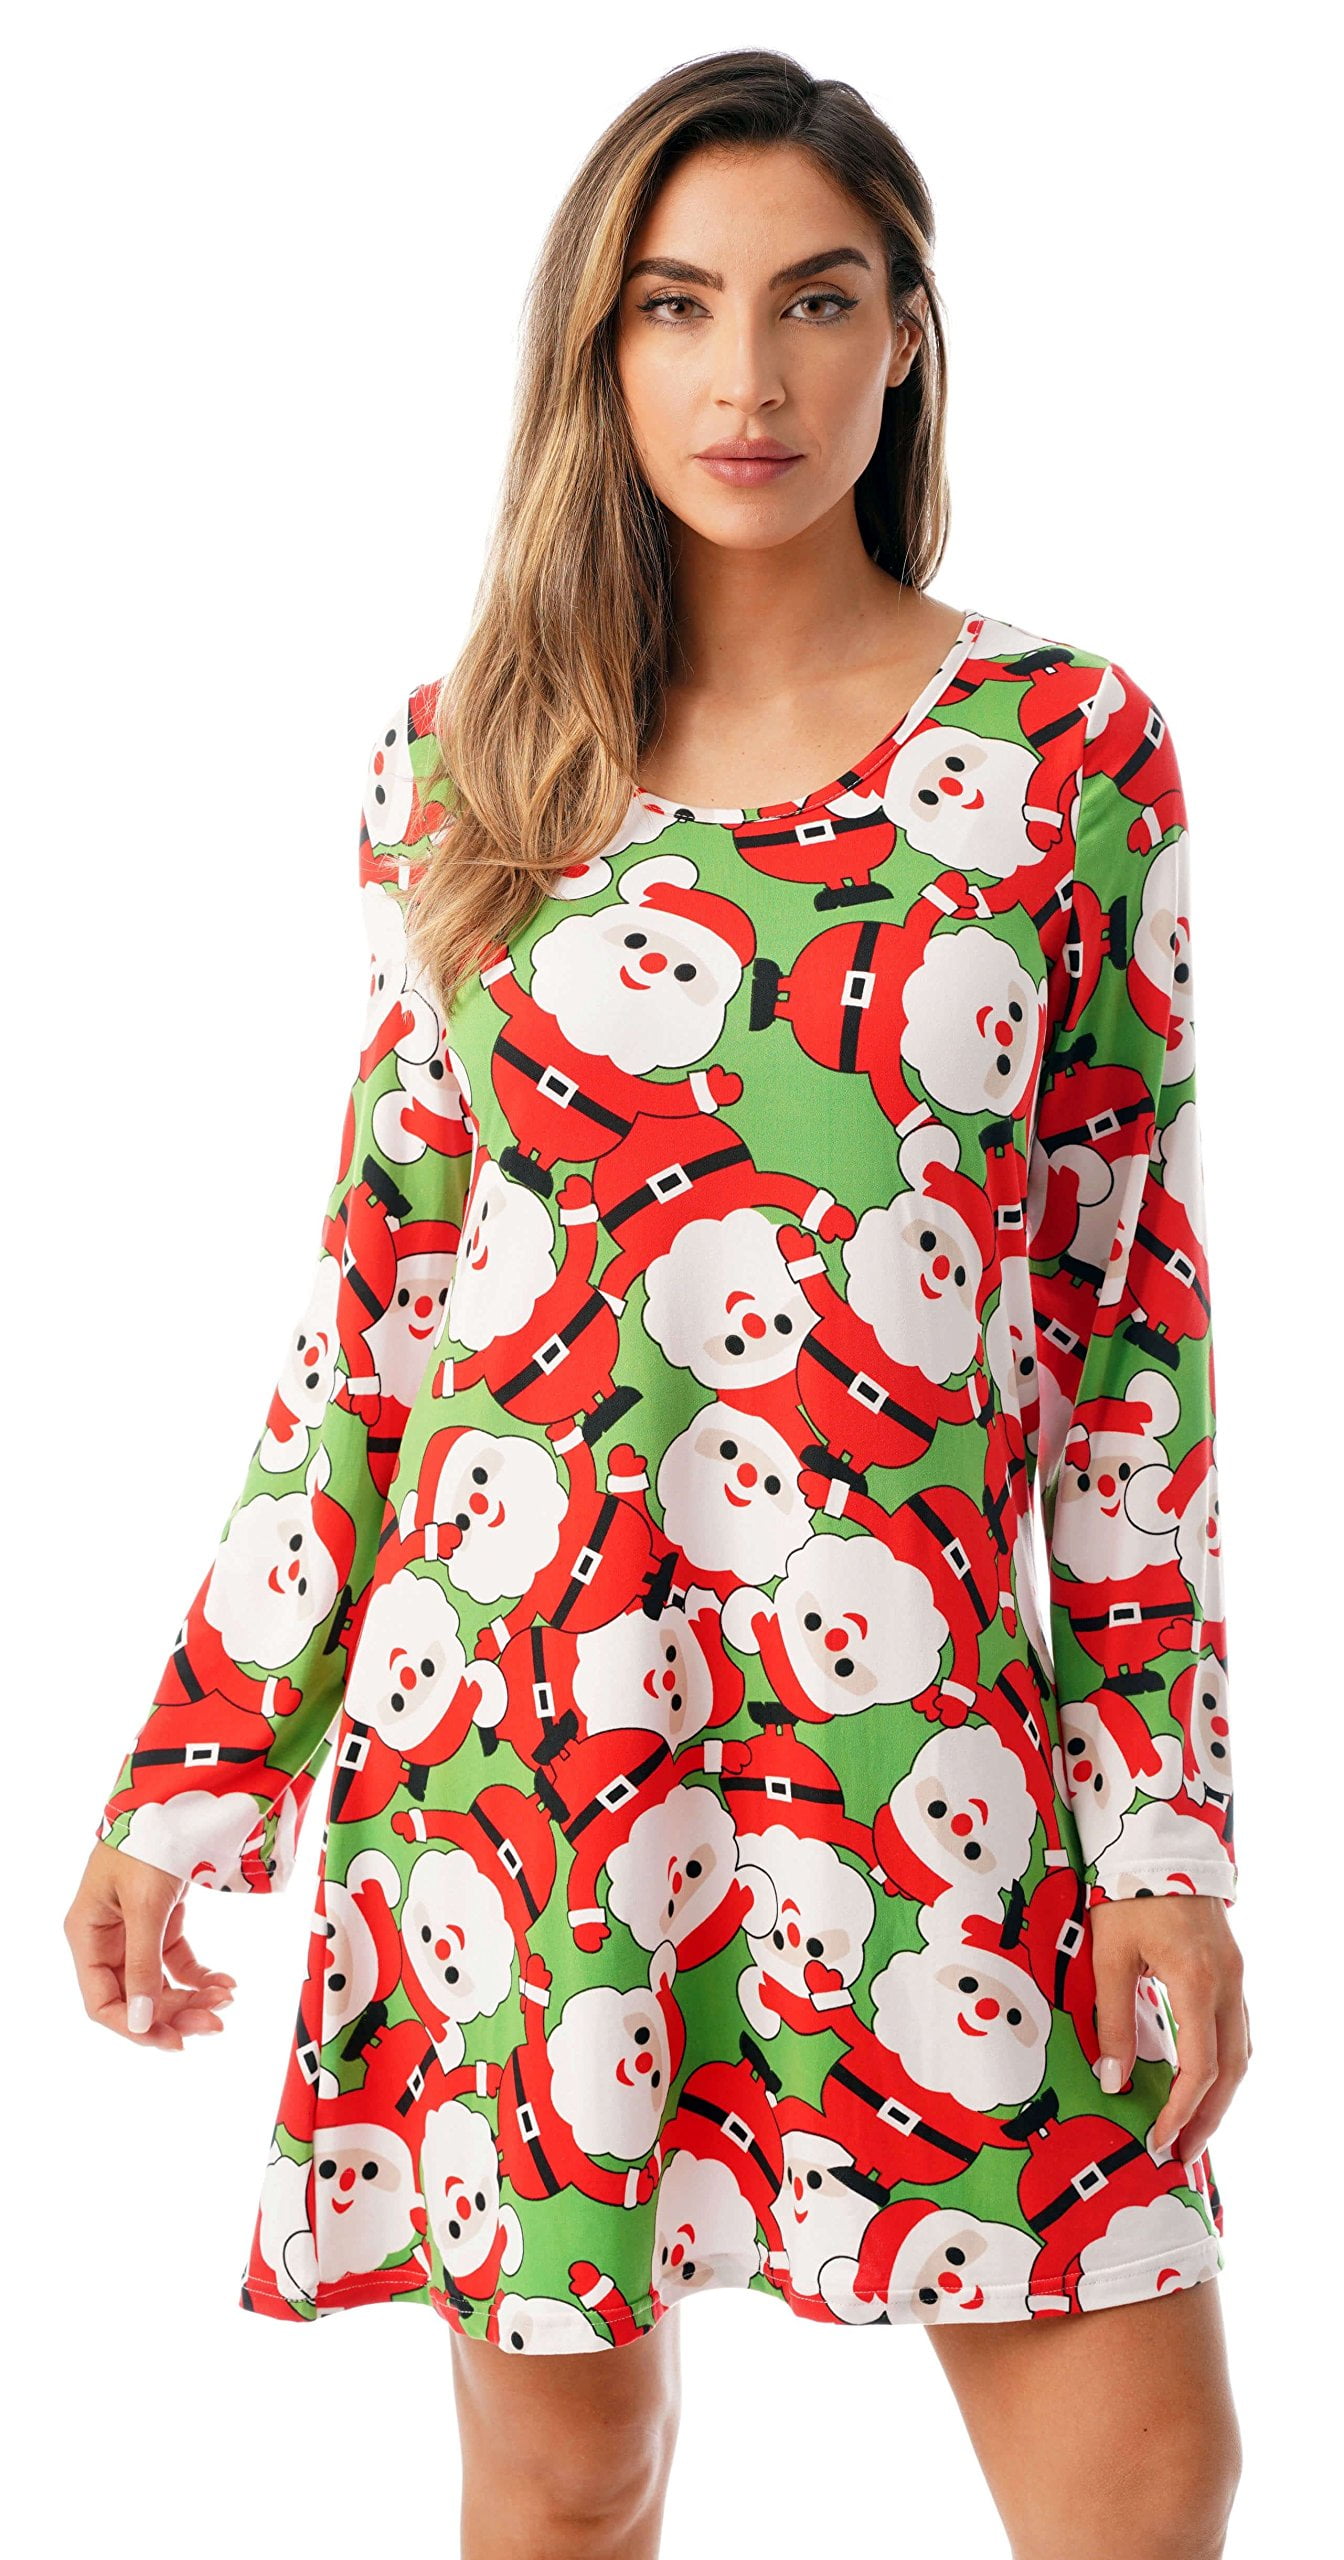 Just Love Ugly Christmas Dress Fun Xmas Party Outfit 401582-103 (Green ...